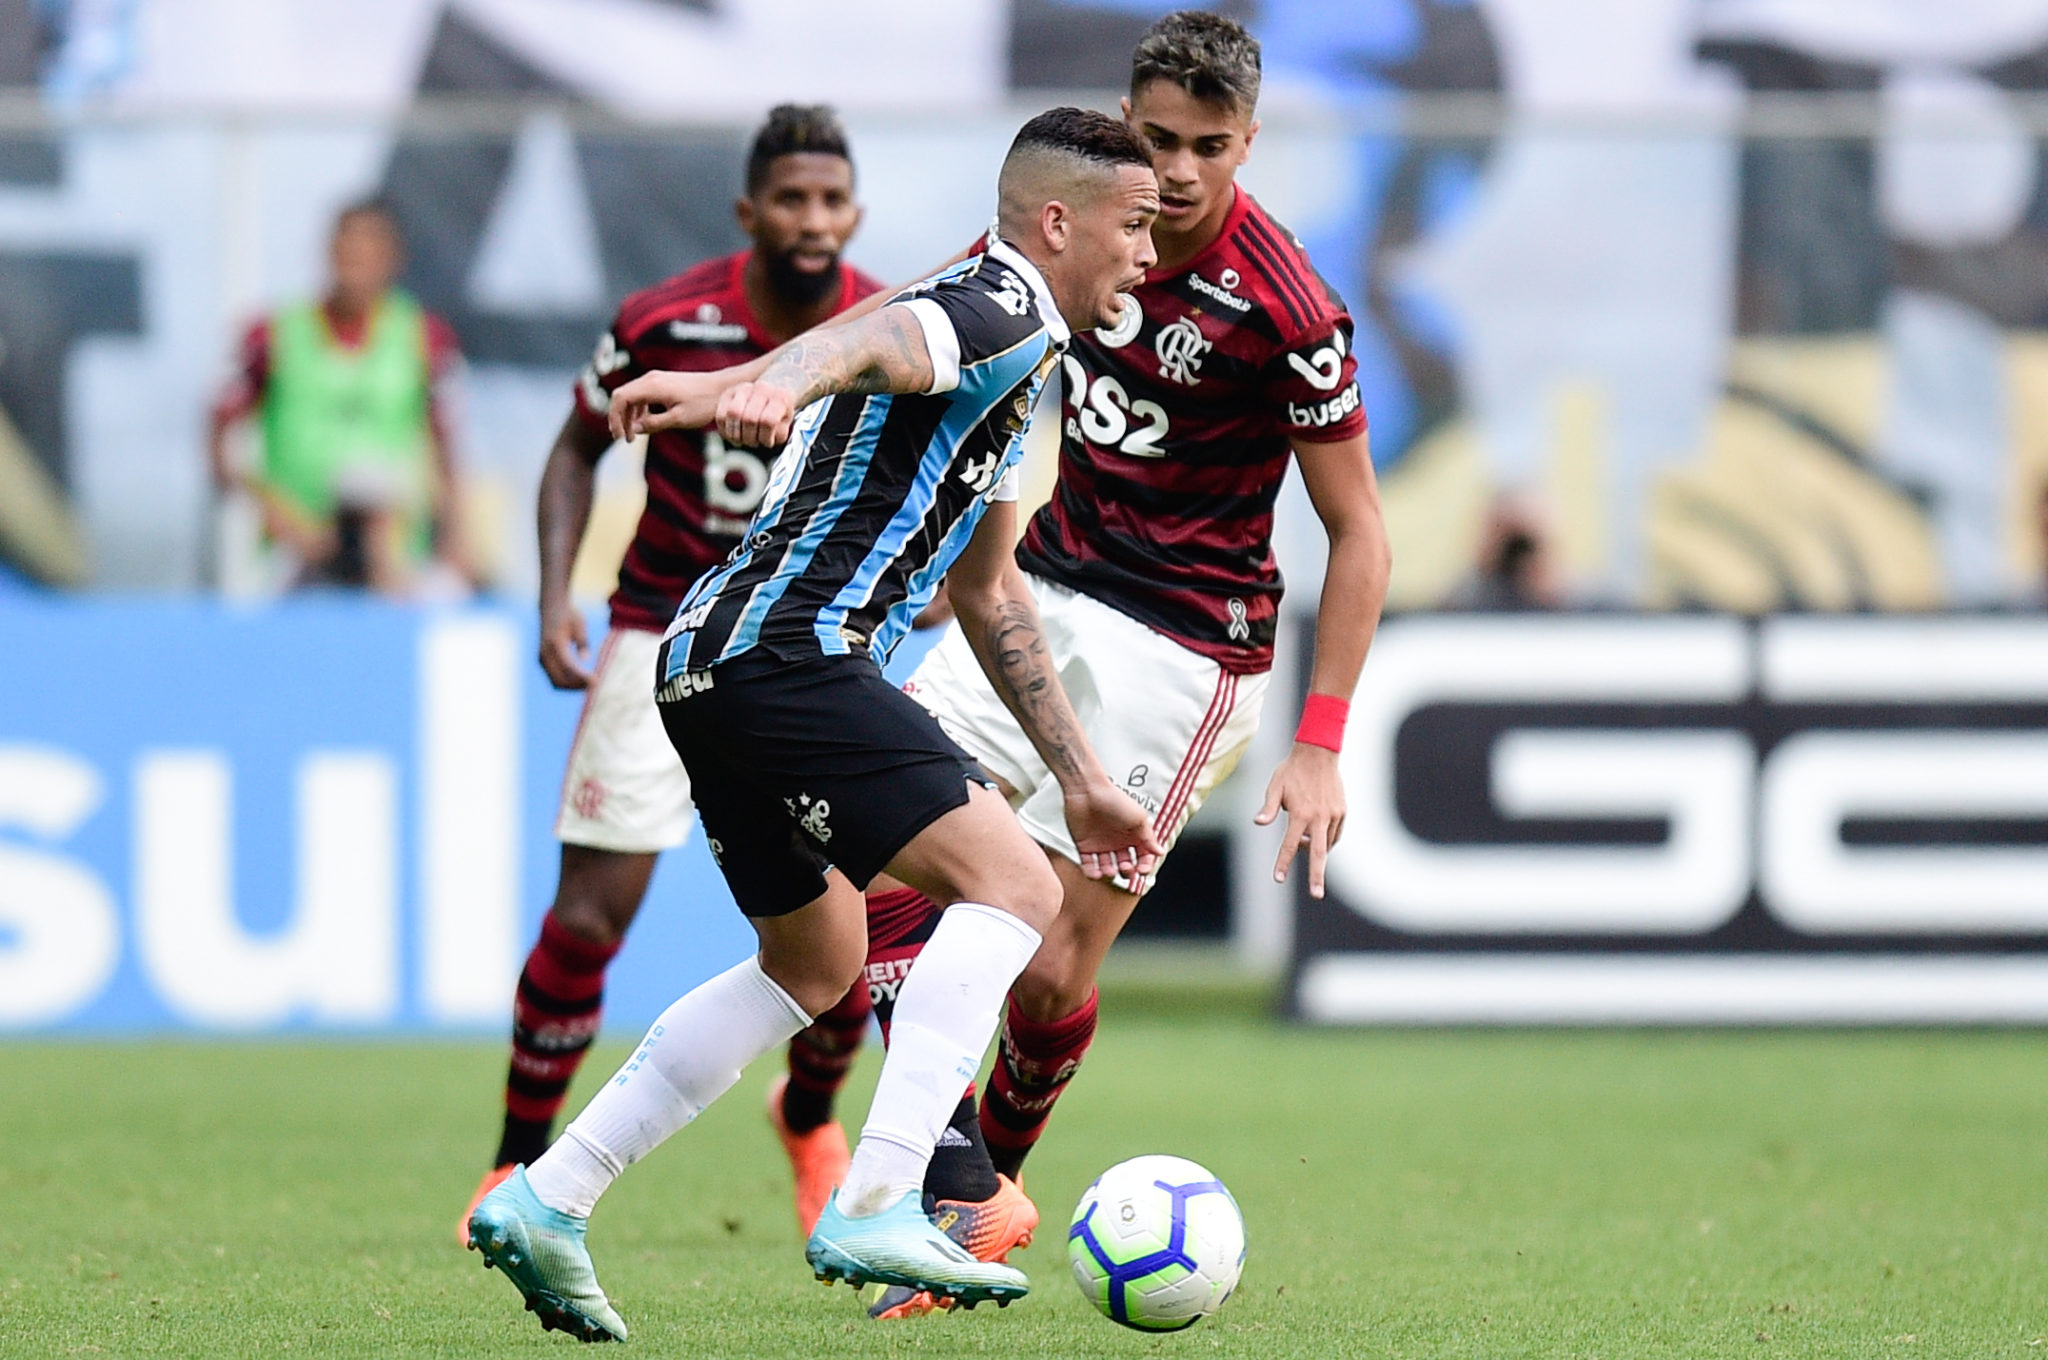 PORTO ALEGRE, BRAZIL - NOVEMBER 17: Luciano #18 of Gremio controls the ball during a match between Gremio and Flamengo as part of Brasileirao Series A 2019 at Arena do Gremio on November 17, 2019 in Porto Alegre, Brazil. (Photo by Juliana Flister/Getty Images)